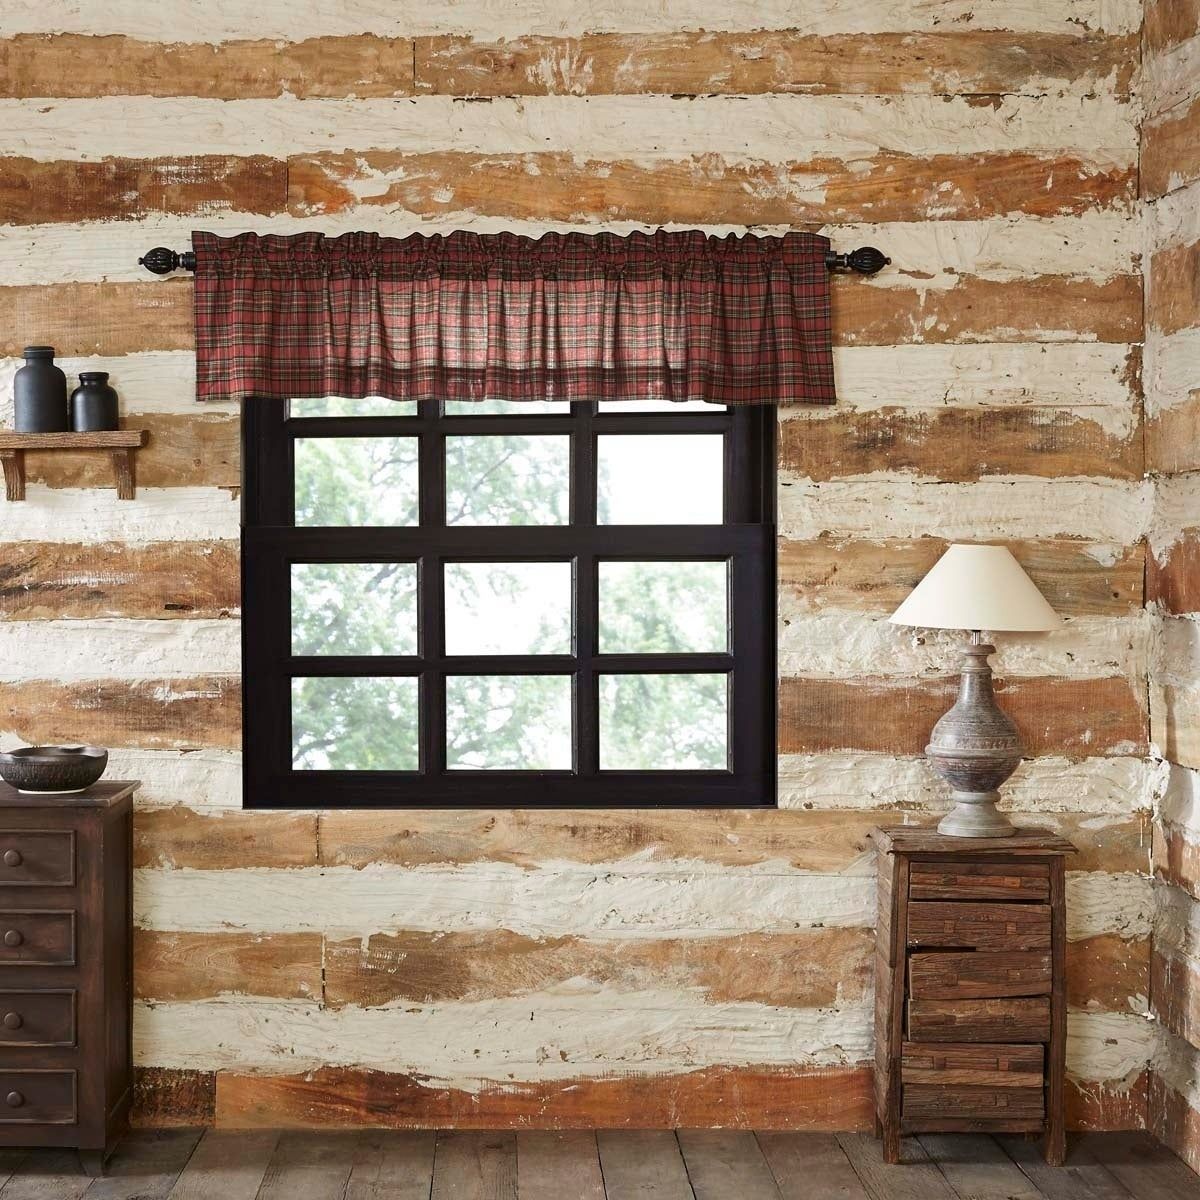 Red Rustic Kitchen Curtains Vhc Tartan Red Plaid Valance Rod Pocket Cotton  Plaid With Rustic Kitchen Curtains (View 6 of 20)